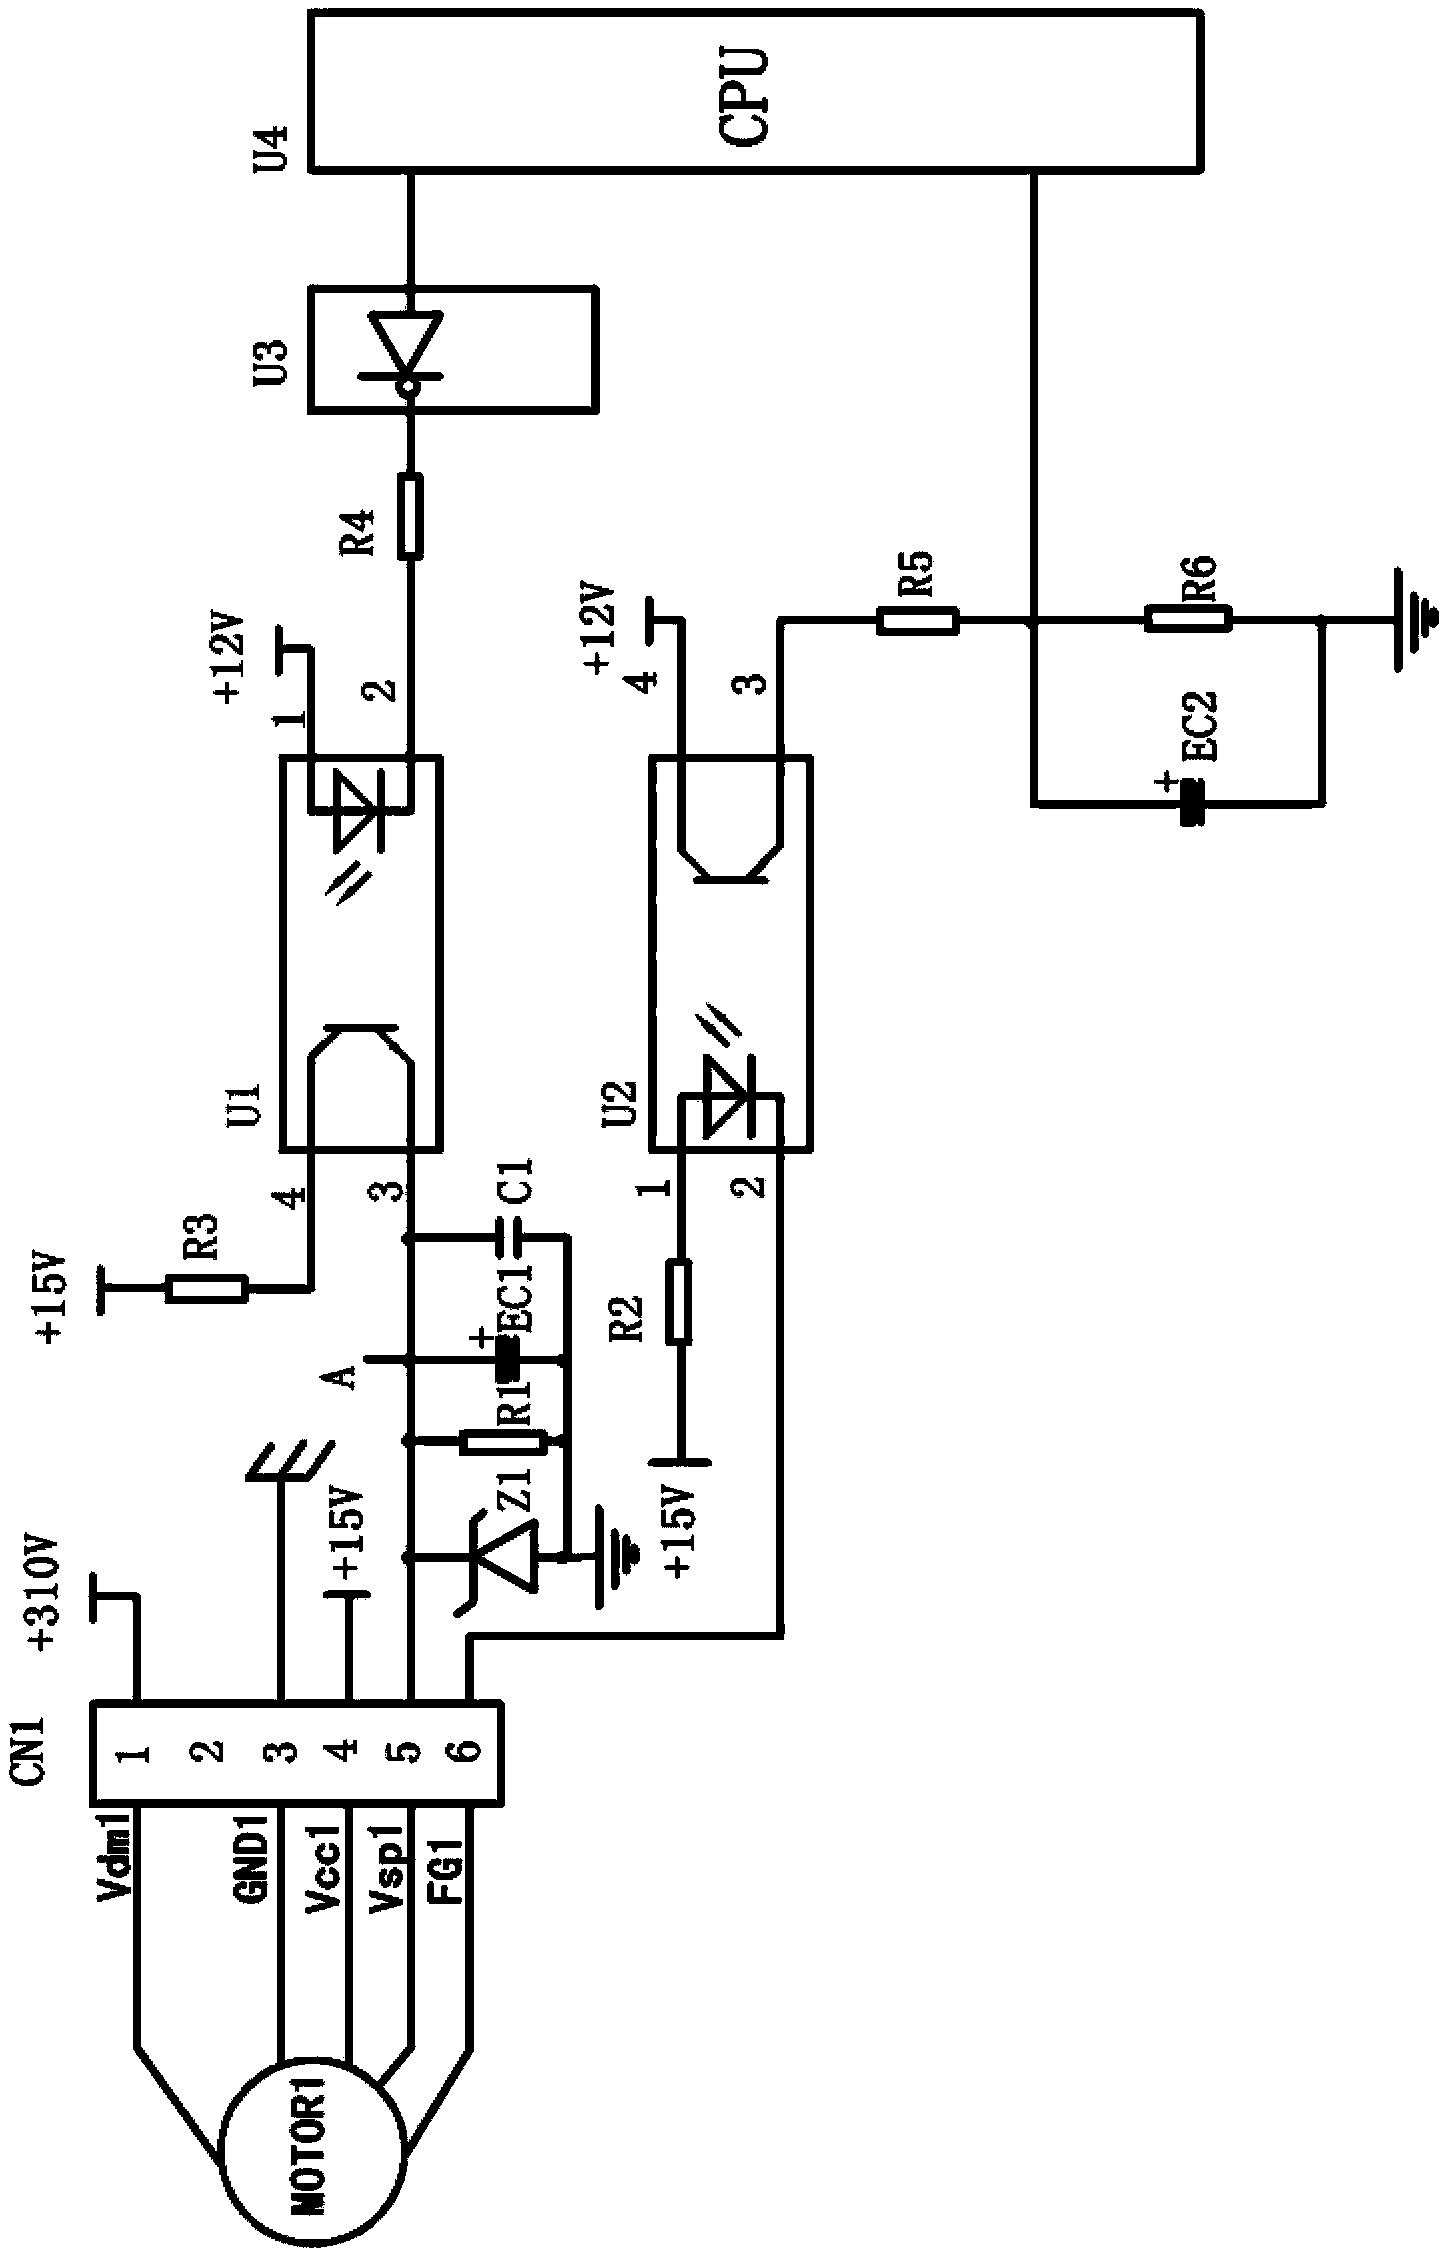 Motor speed regulating voltage Vsp cut-off circuit of air conditioning system of brushless motor